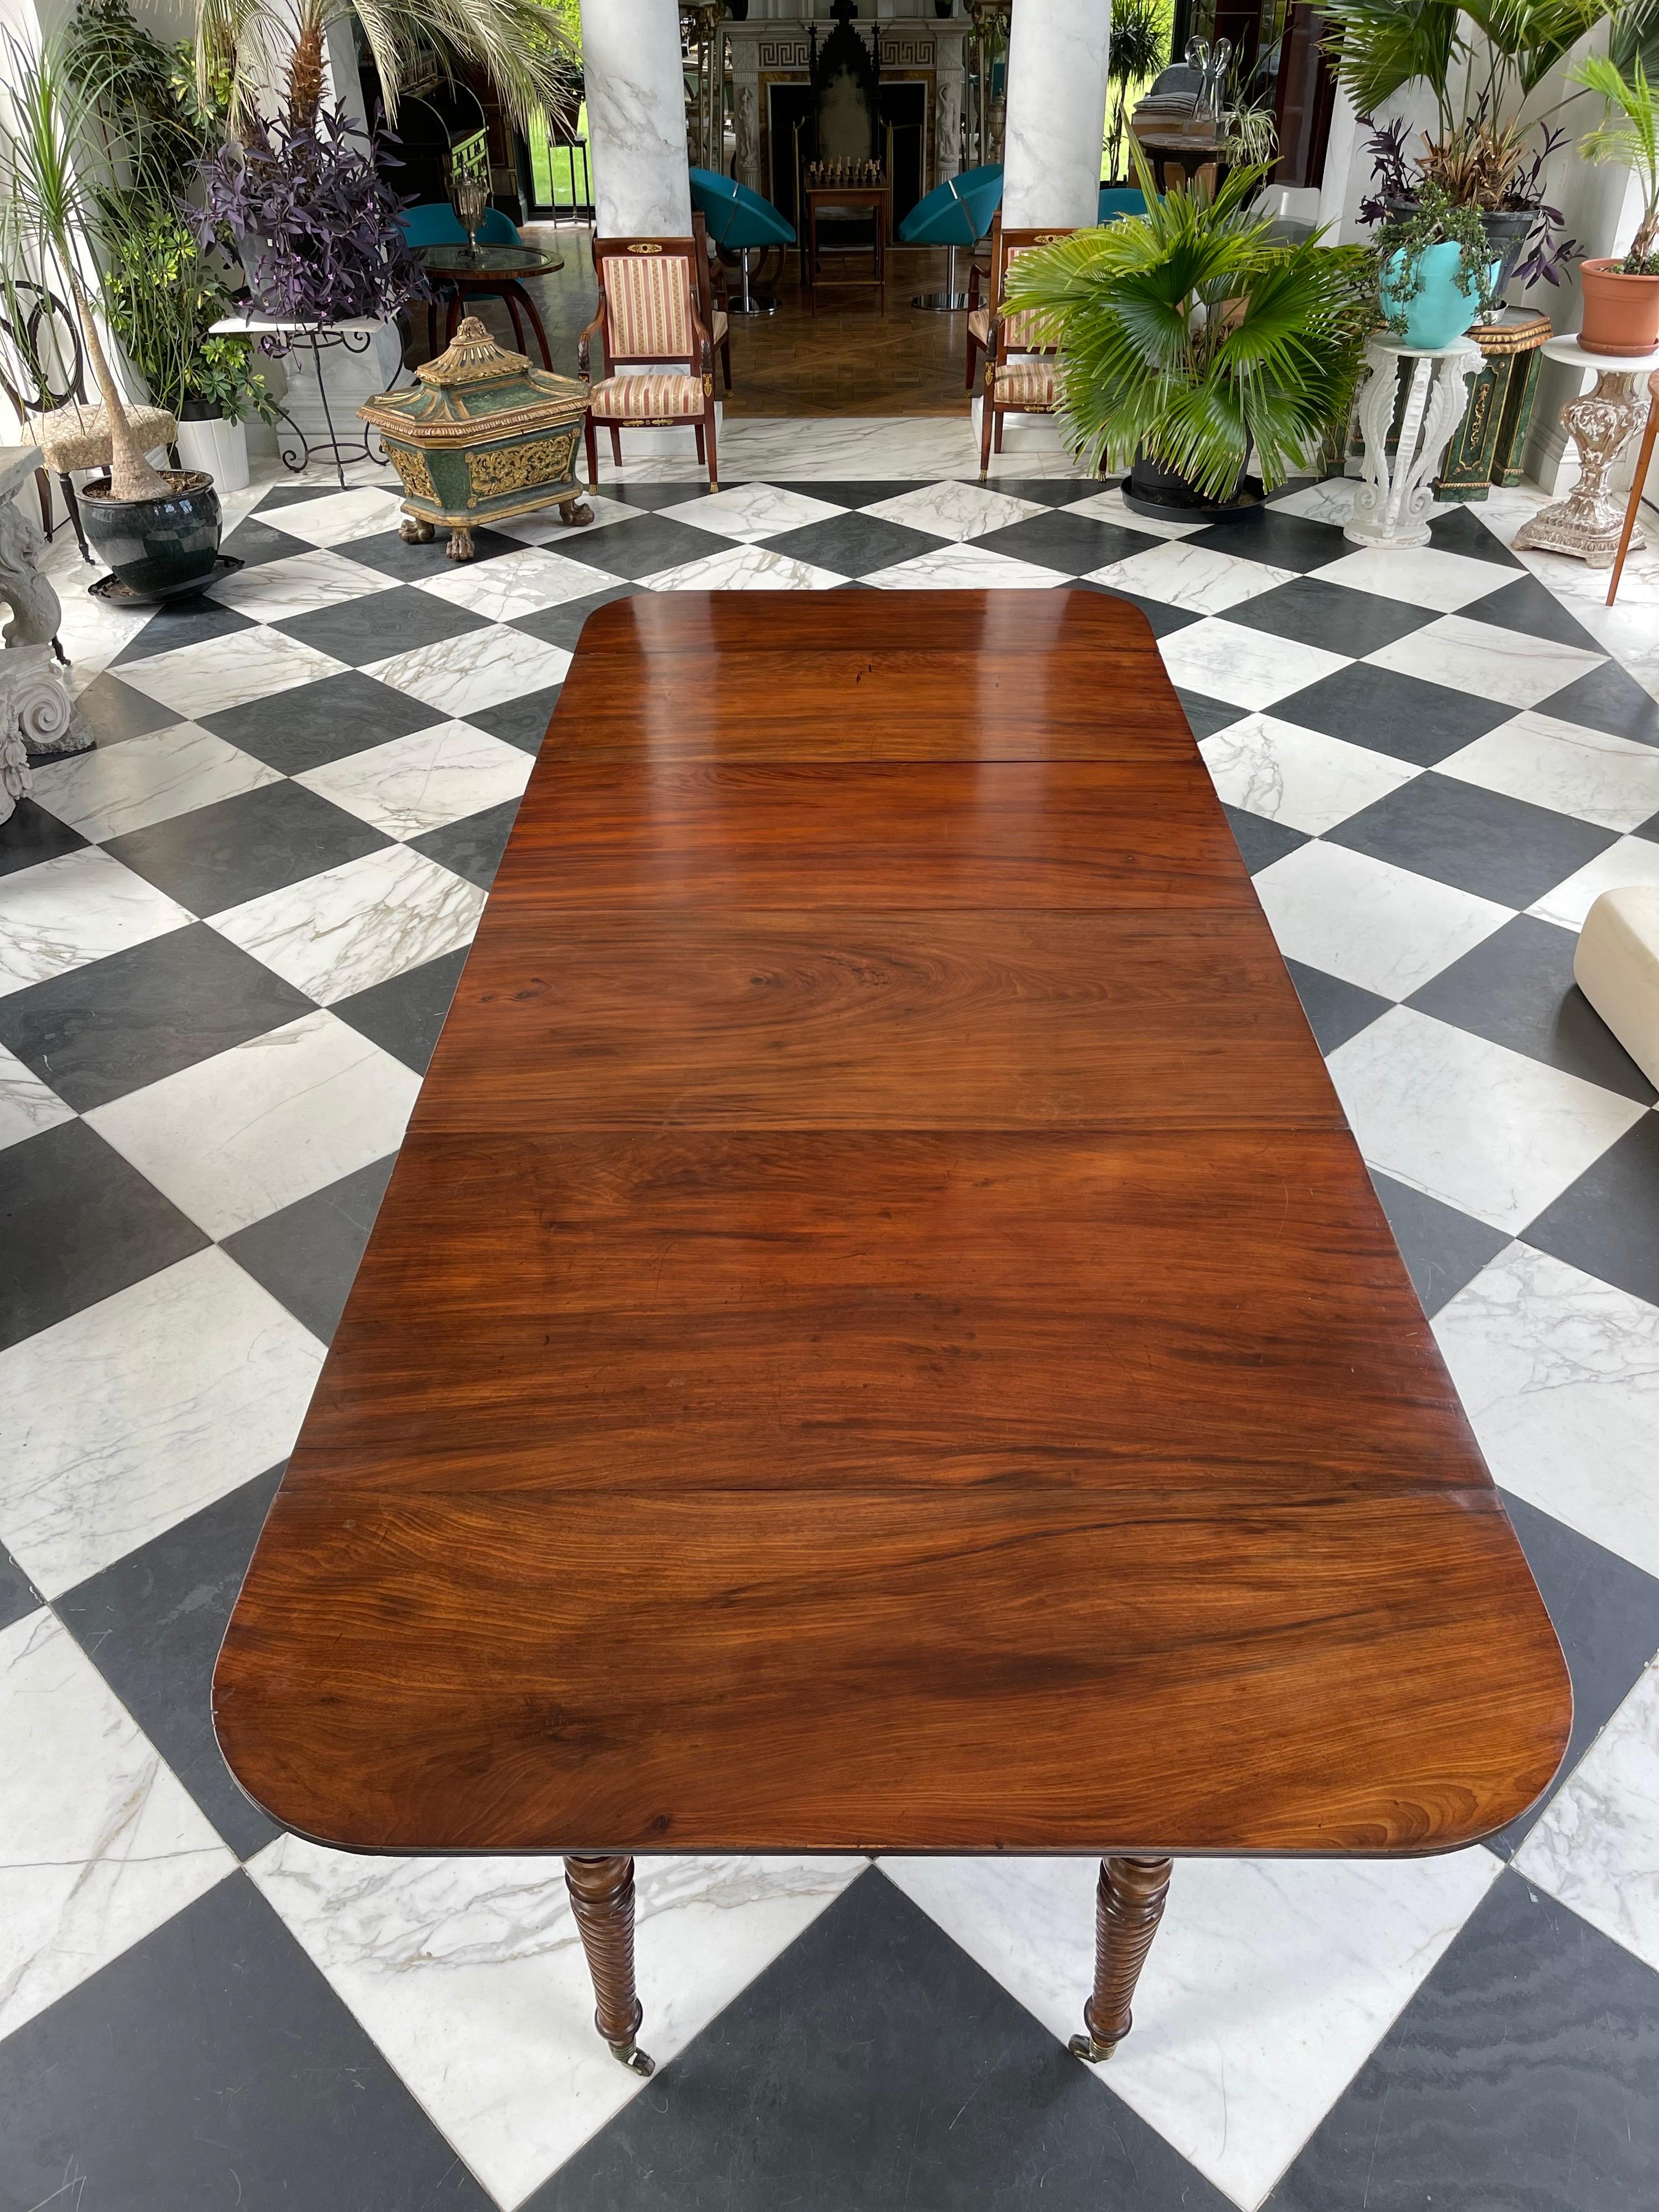 Stunning Federal Period Cuban mahogany banquet table extending to seat up to 14 people. 
The swirling reeded elegantly tapered legs retain their original brass castors with bone wheels. 
The telescoping ends collapse into a fine rectangular serving